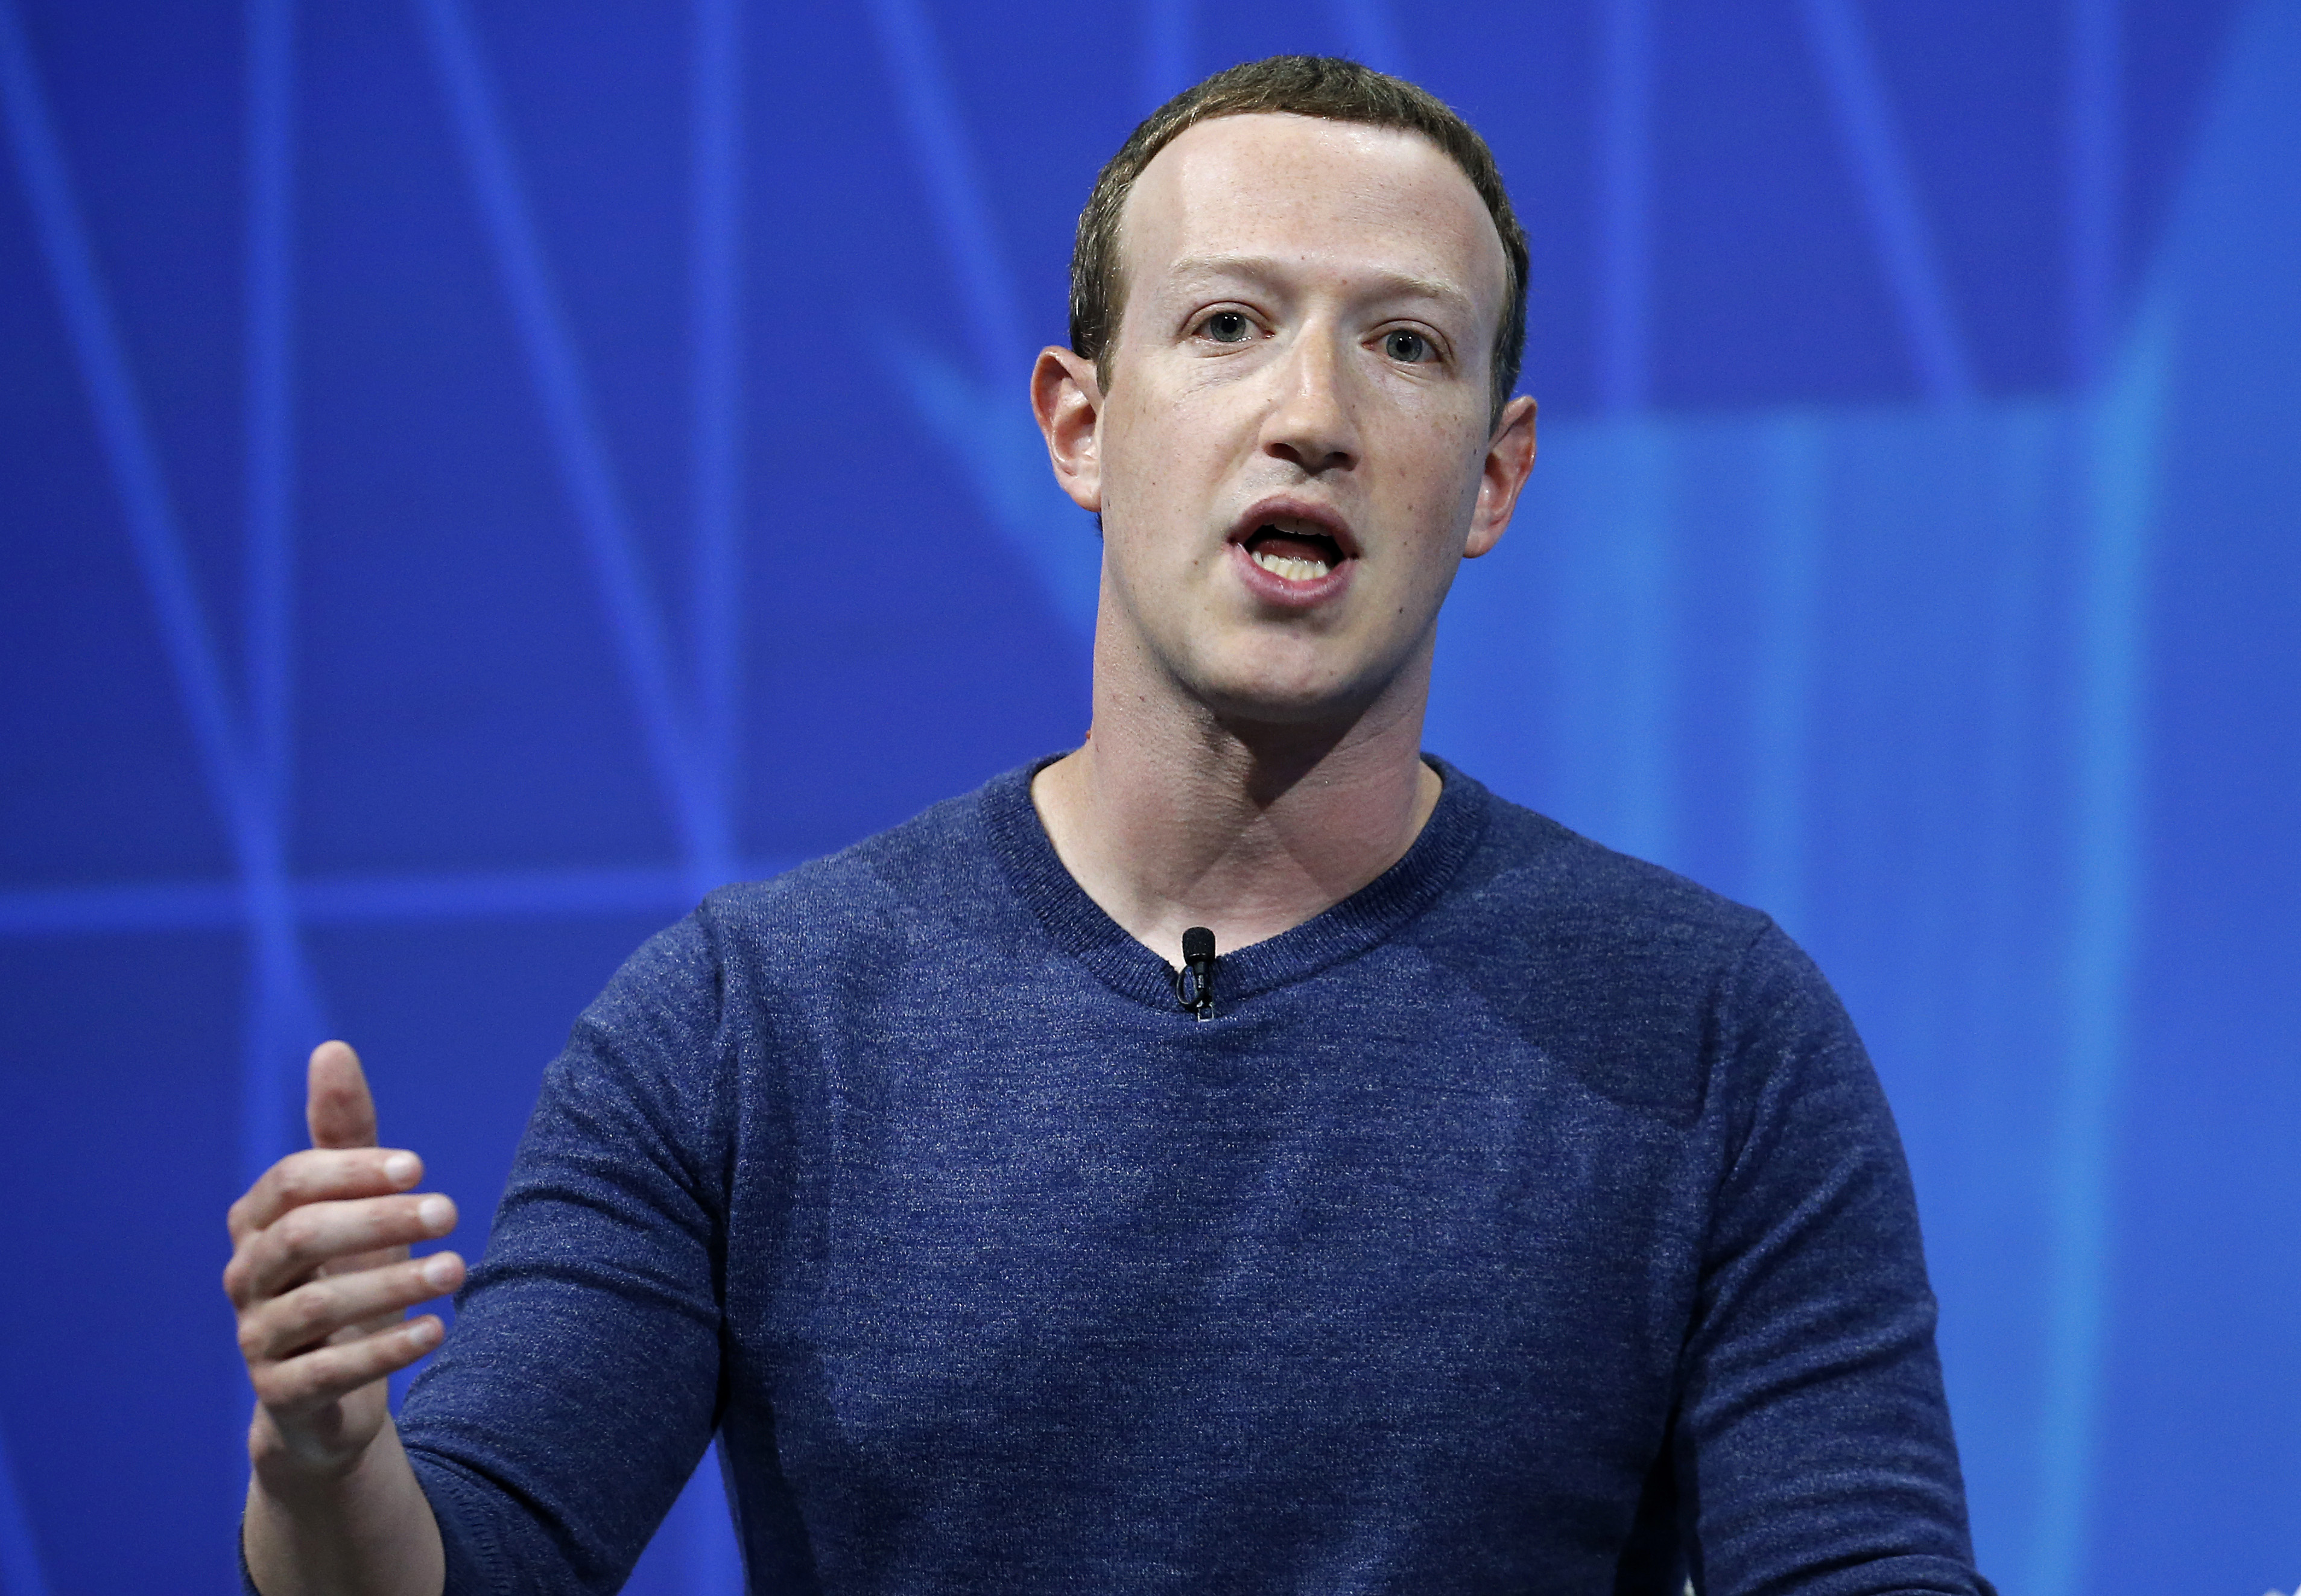 Facebook's founder and CEO Mark Zuckerberg speaks to participants during the Viva Technologie show at Parc des Expositions Porte de Versailles on May 24, 2018 in Paris, France. (Chesnot/Getty Images)